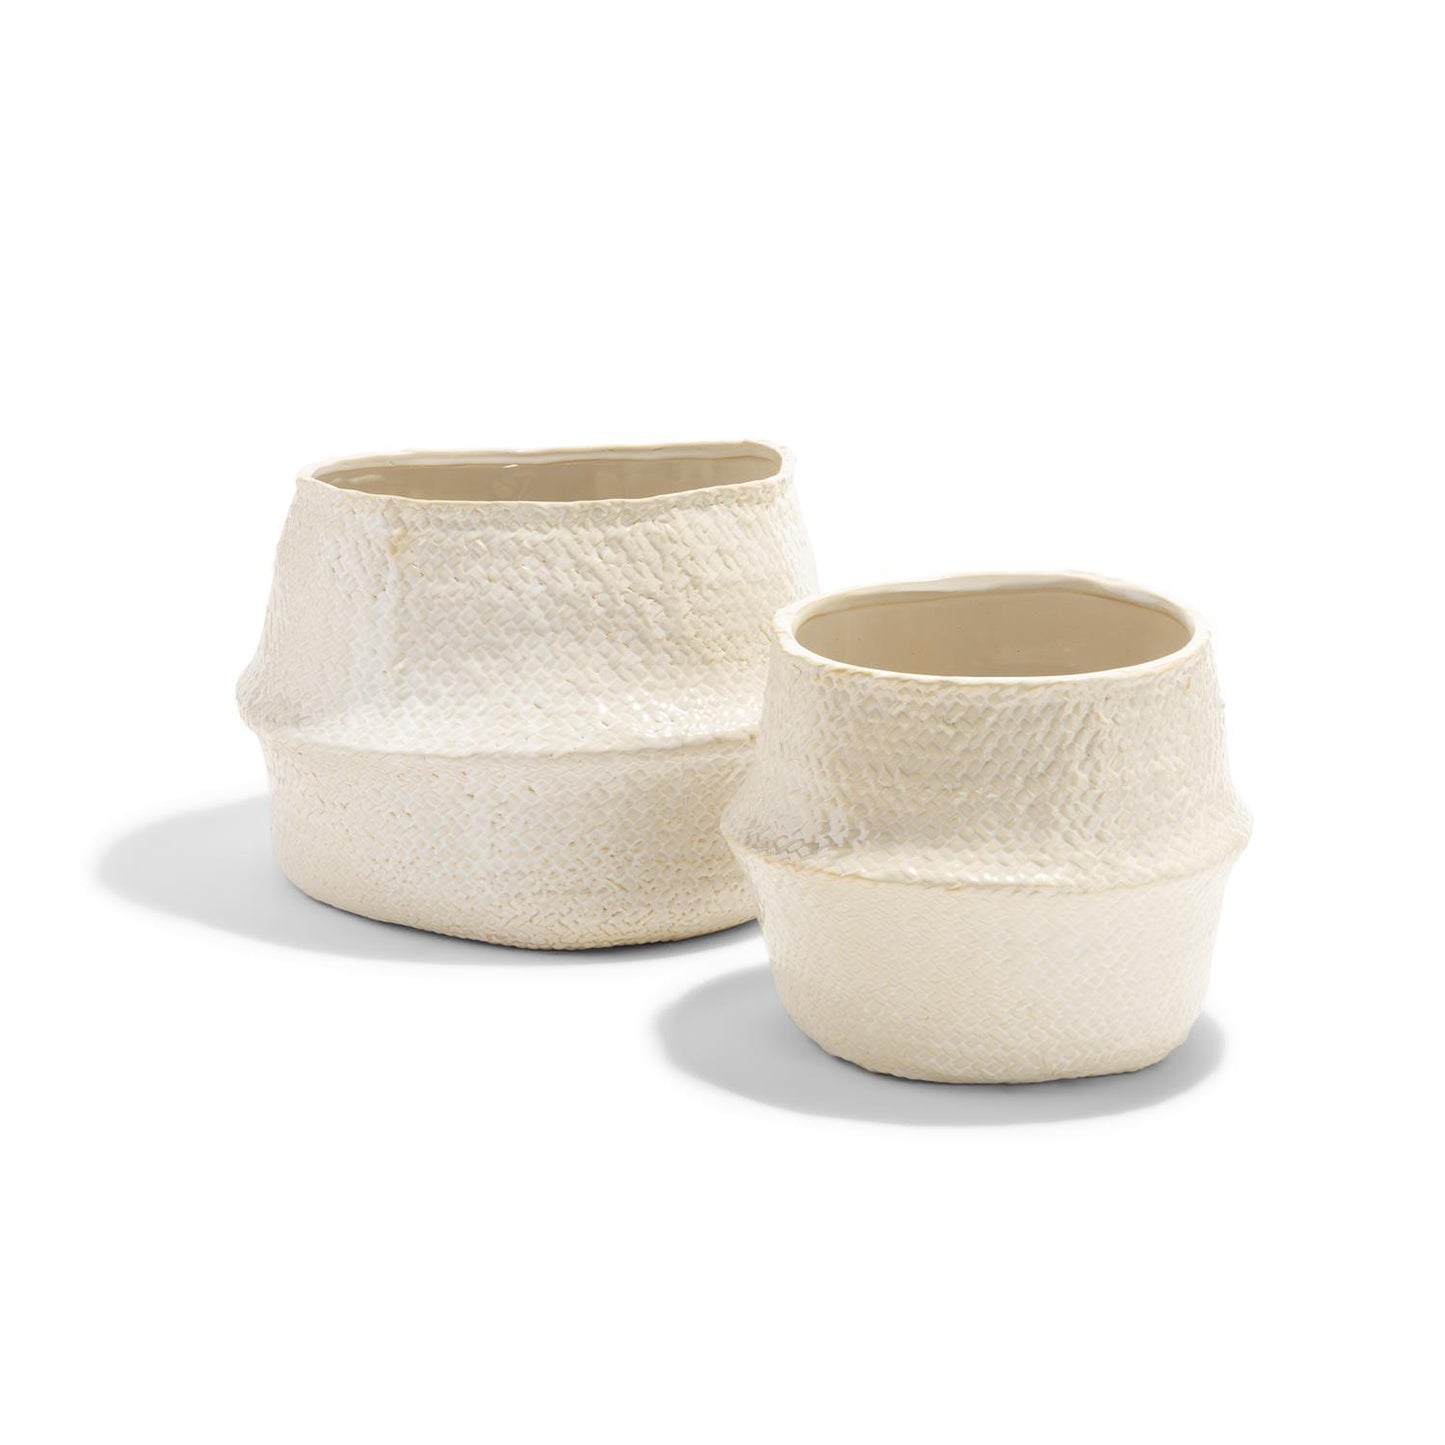 White Pot Decoration with Weave Texture - Set of 2